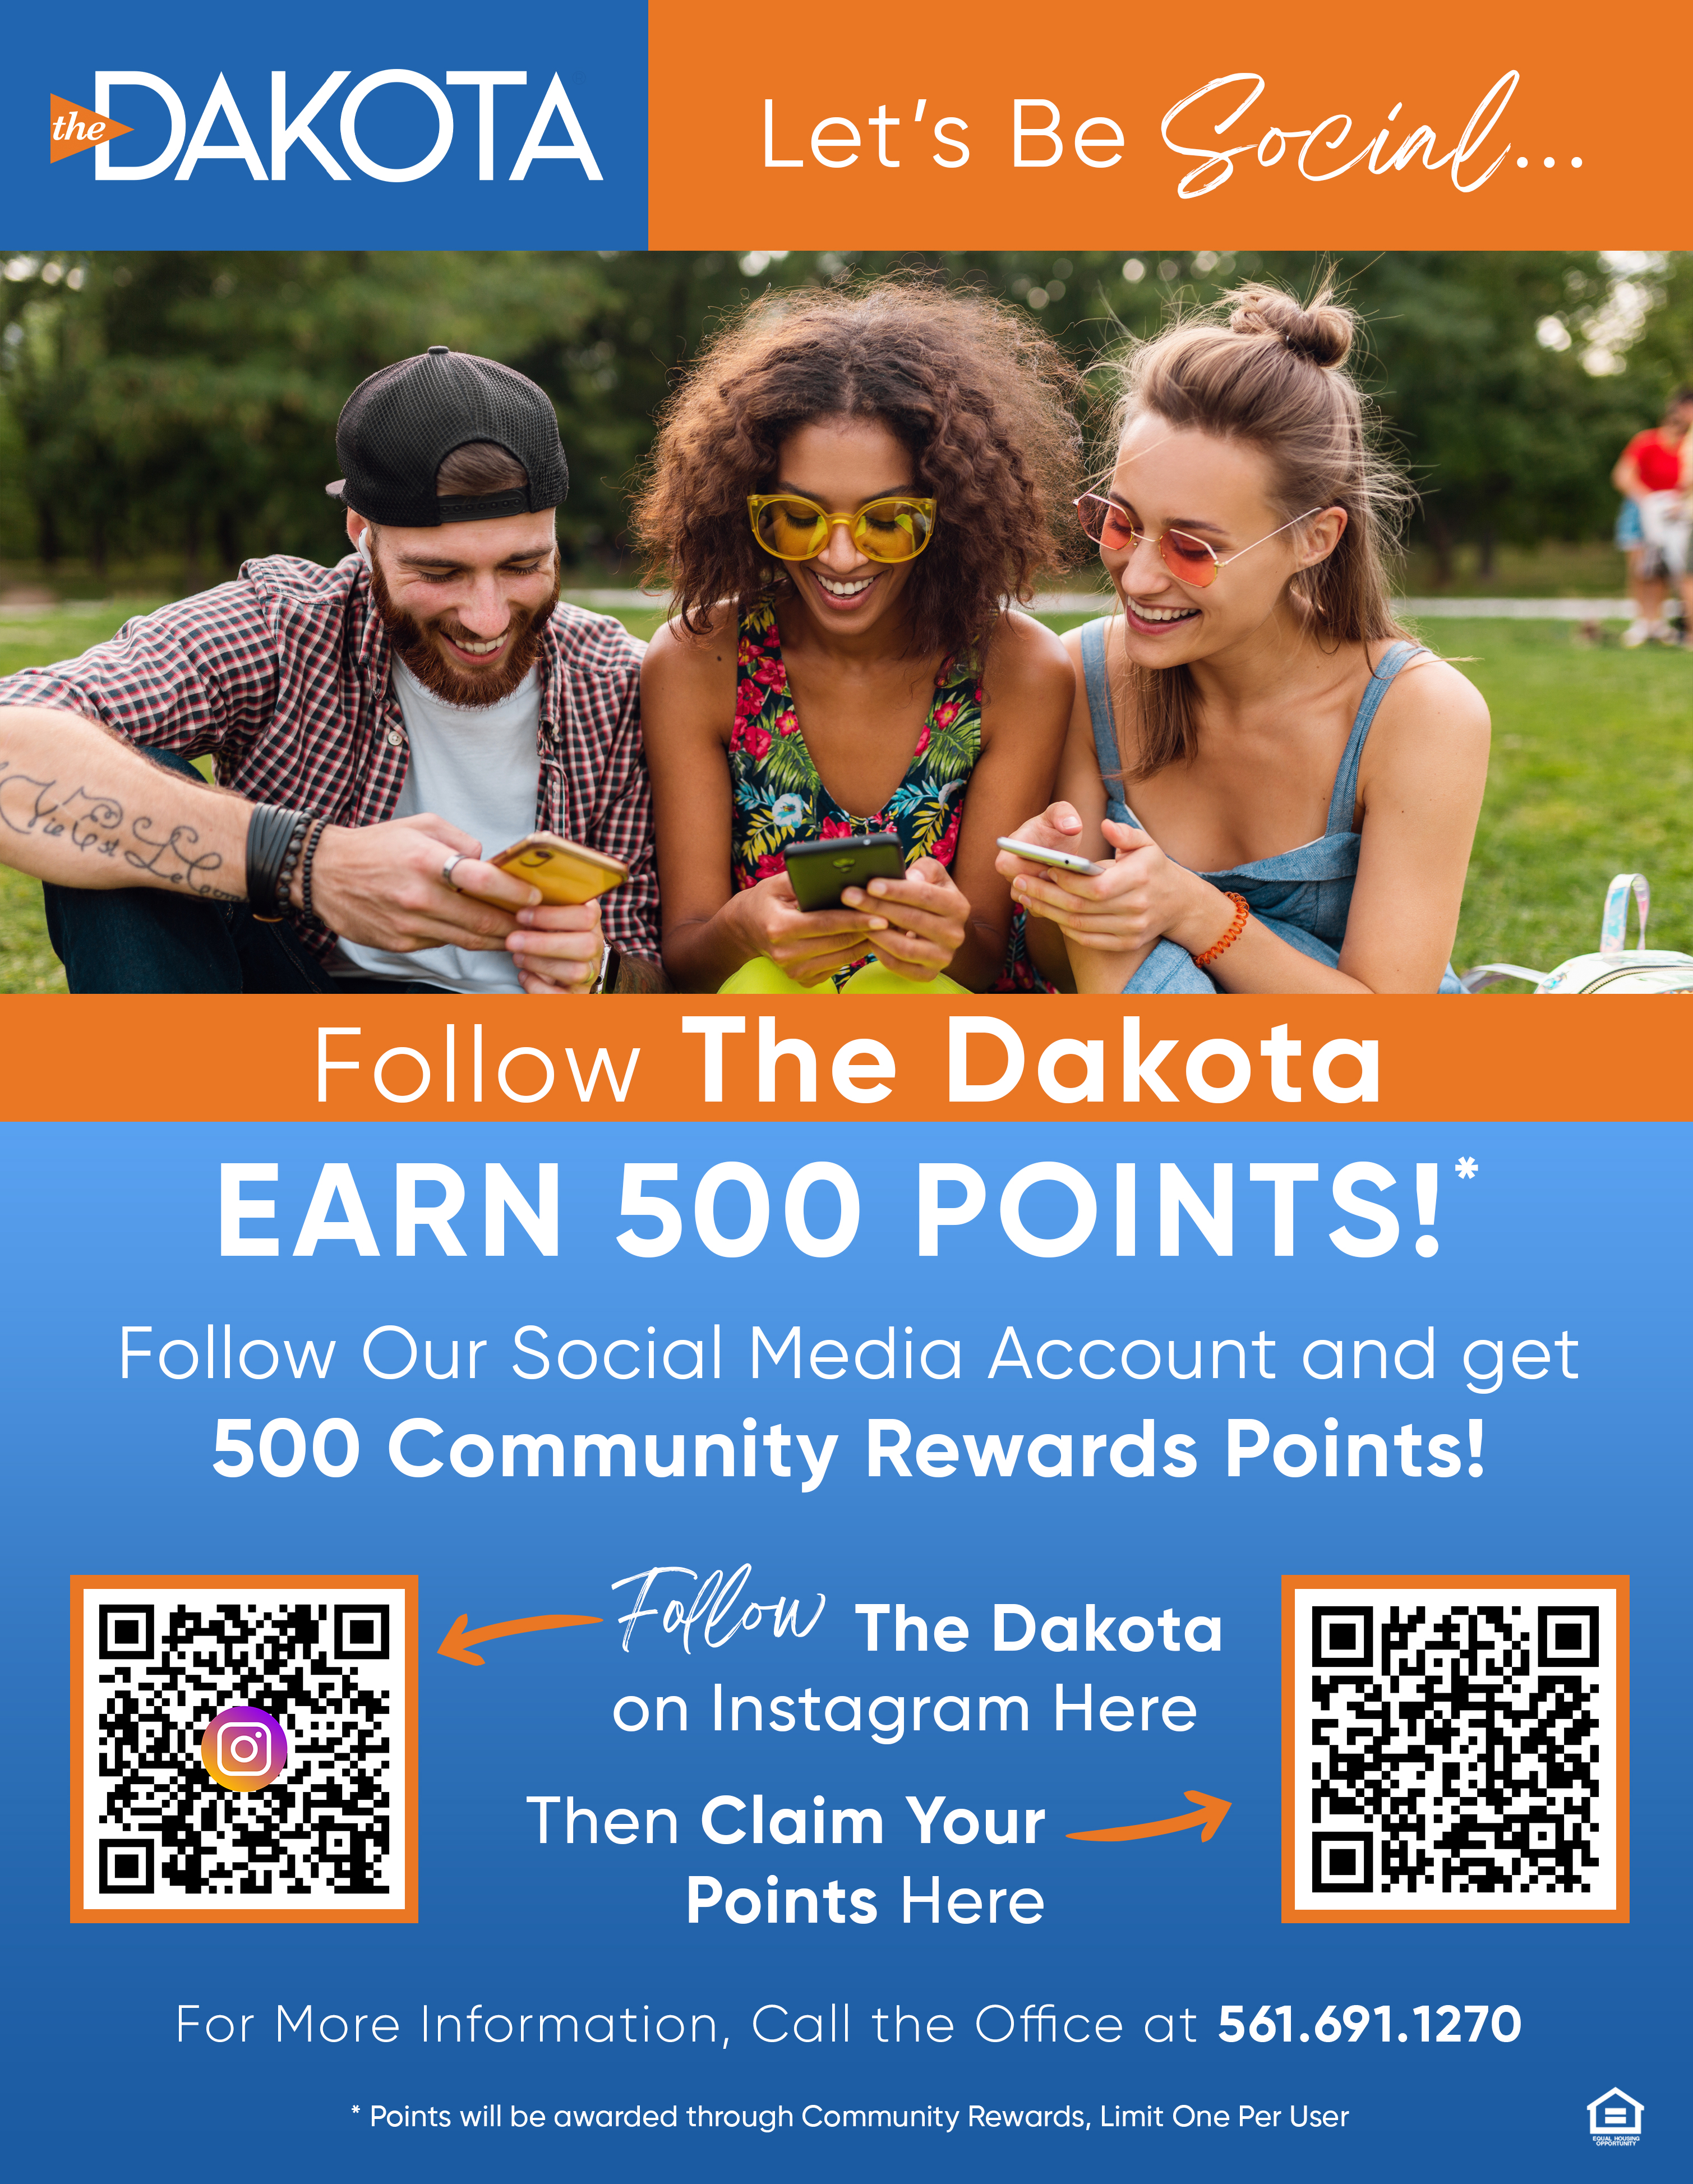 Follow The Dakota on our social media (Instagram) account and earn 500  Community Reward Points! *Points will be awarded through Community Rewards, Limit One Per User. 